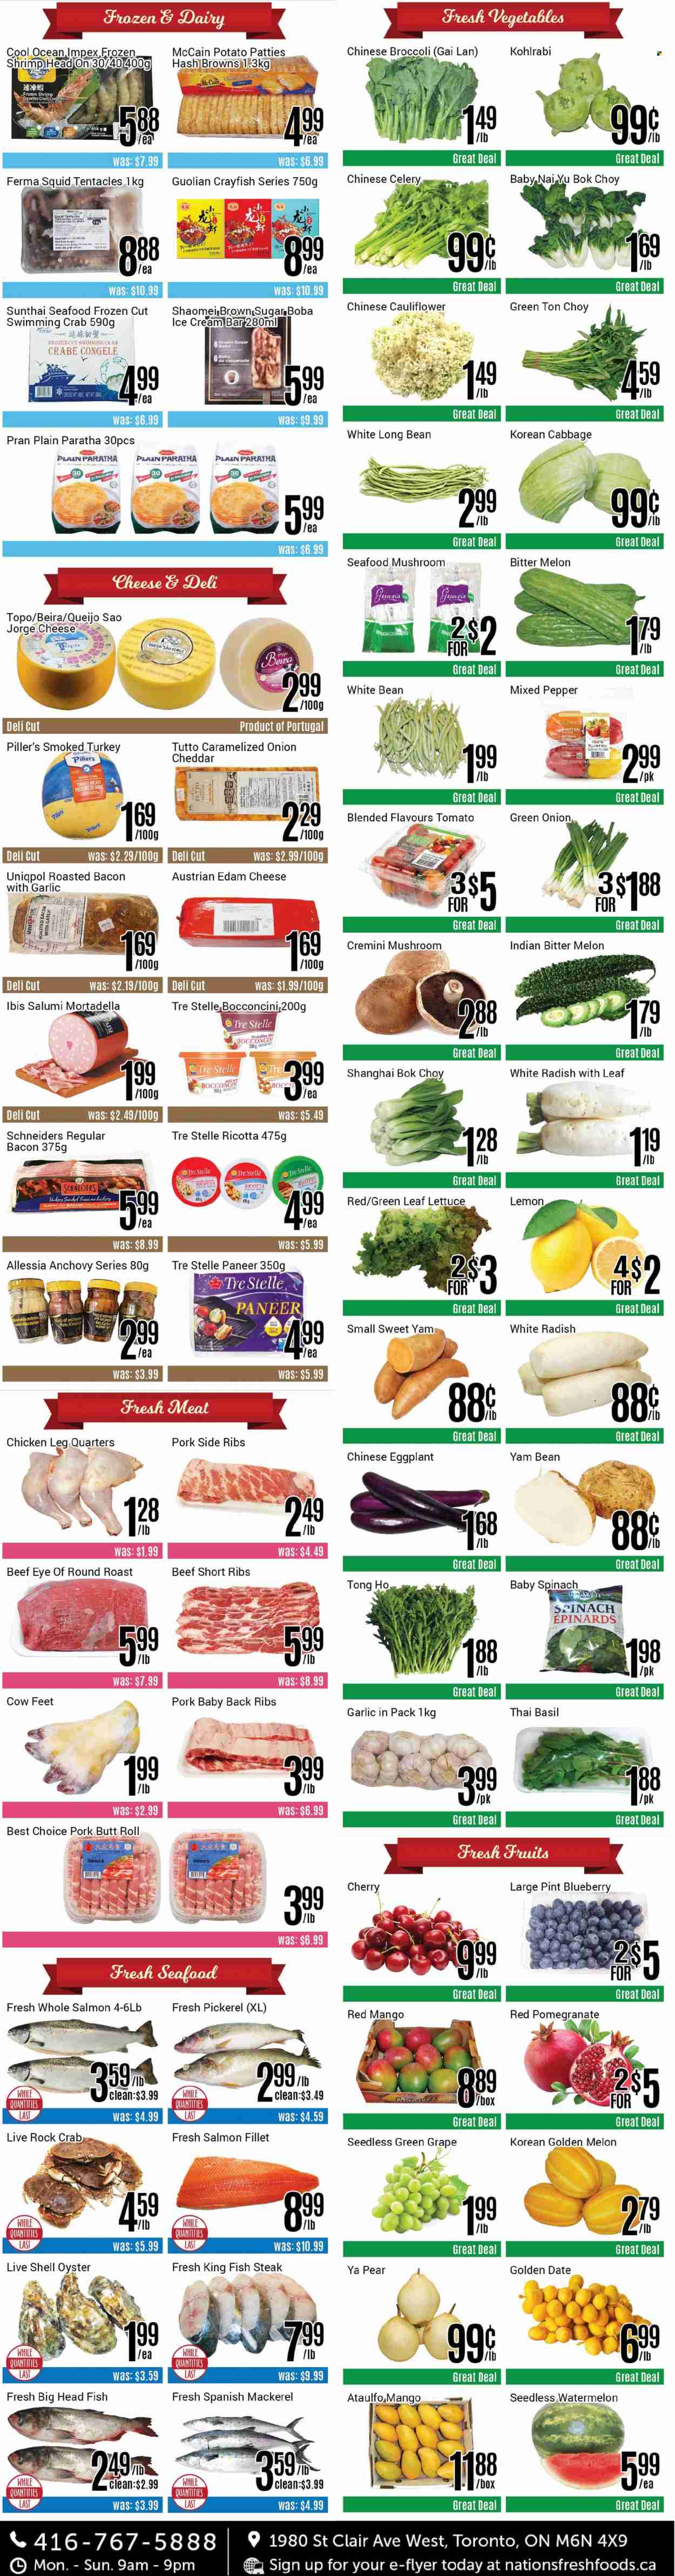 thumbnail - Nations Fresh Foods Flyer - May 13, 2022 - May 19, 2022 - Sales products - mushrooms, bok choy, broccoli, cabbage, cauliflower, celery, radishes, spinach, onion, lettuce, eggplant, white radish, green onion, mango, watermelon, cherries, pears, melons, pomegranate, mackerel, salmon, salmon fillet, squid, oysters, seafood, crab, fish, king fish, shrimps, fish steak, walleye, bacon, mortadella, bocconcini, edam cheese, cheddar, paneer, ice cream, McCain, hash browns, cane sugar, anchovies, esponja, tea, turkey breast, chicken legs, turkey, beef meat, beef ribs, eye of round, round roast, roast beef, pork meat, pork ribs, pork back ribs, Rin, kohlrabi, ricotta, chinese broccoli, steak. Page 2.